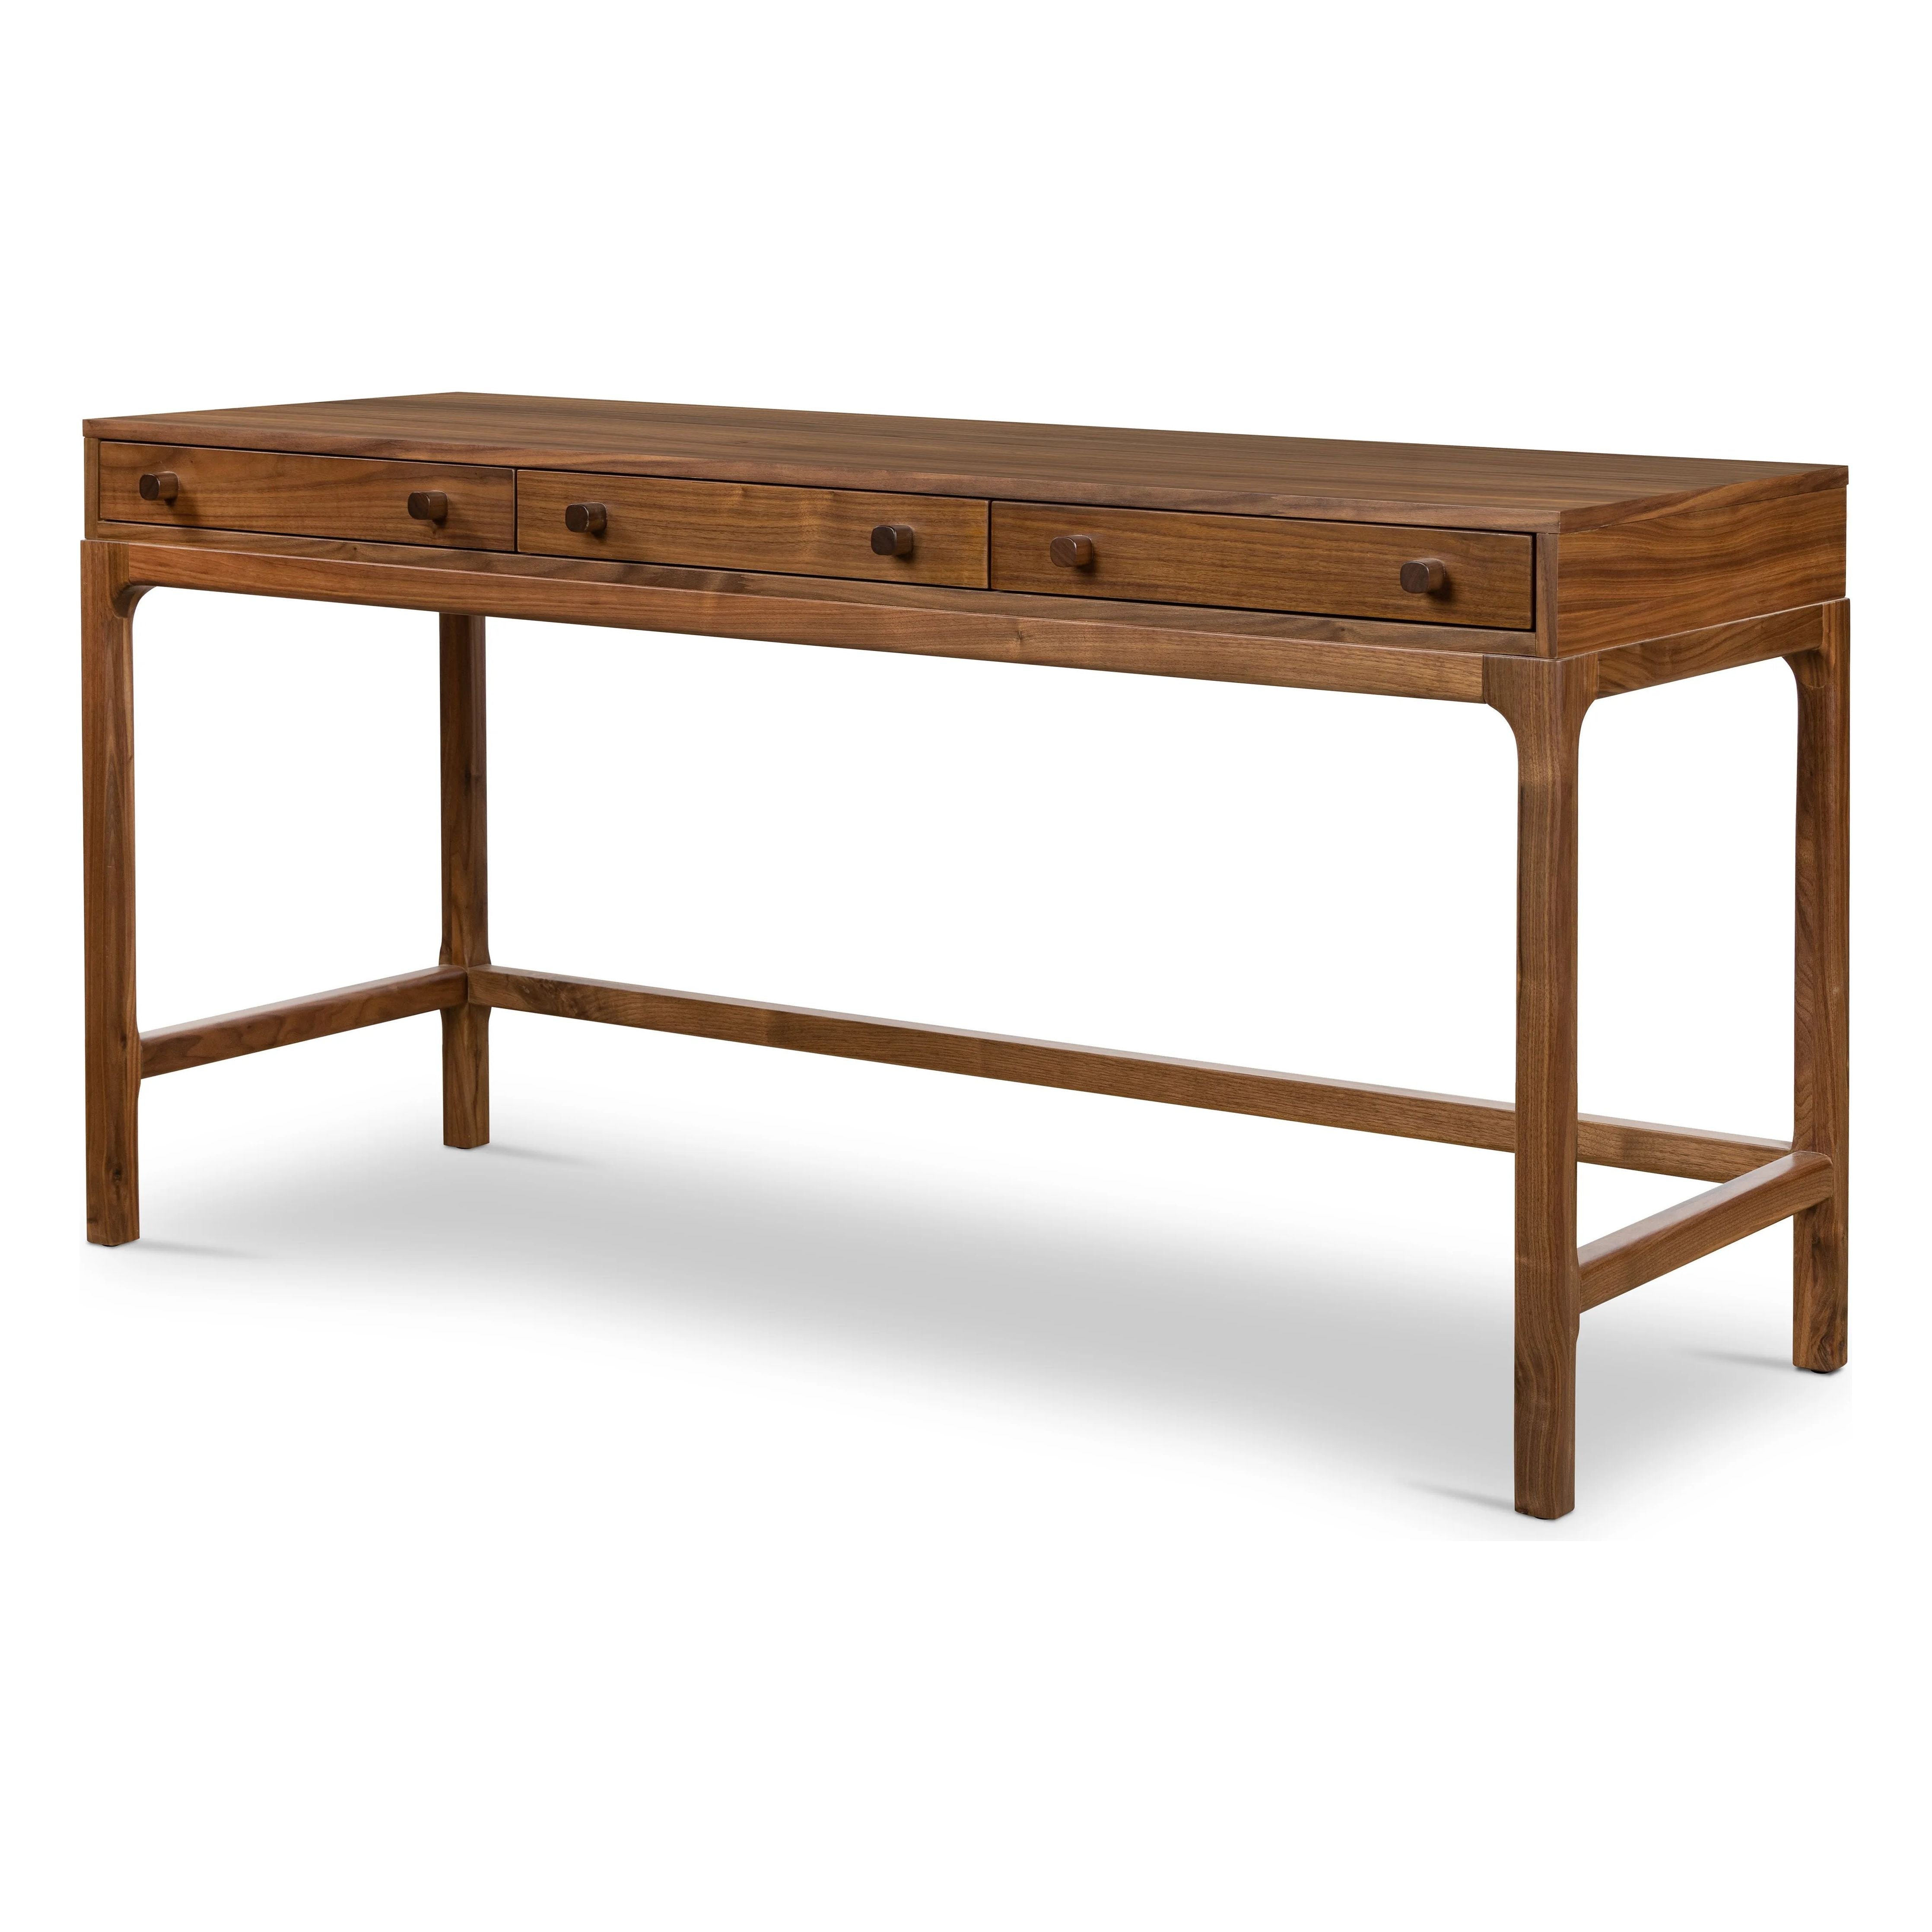 Made from solid walnut in a classic natural finish, a slim-profile desk features three drawers to keep frequently used items on hand Amethyst Home provides interior design, new home construction design consulting, vintage area rugs, and lighting in the Los Angeles metro area.